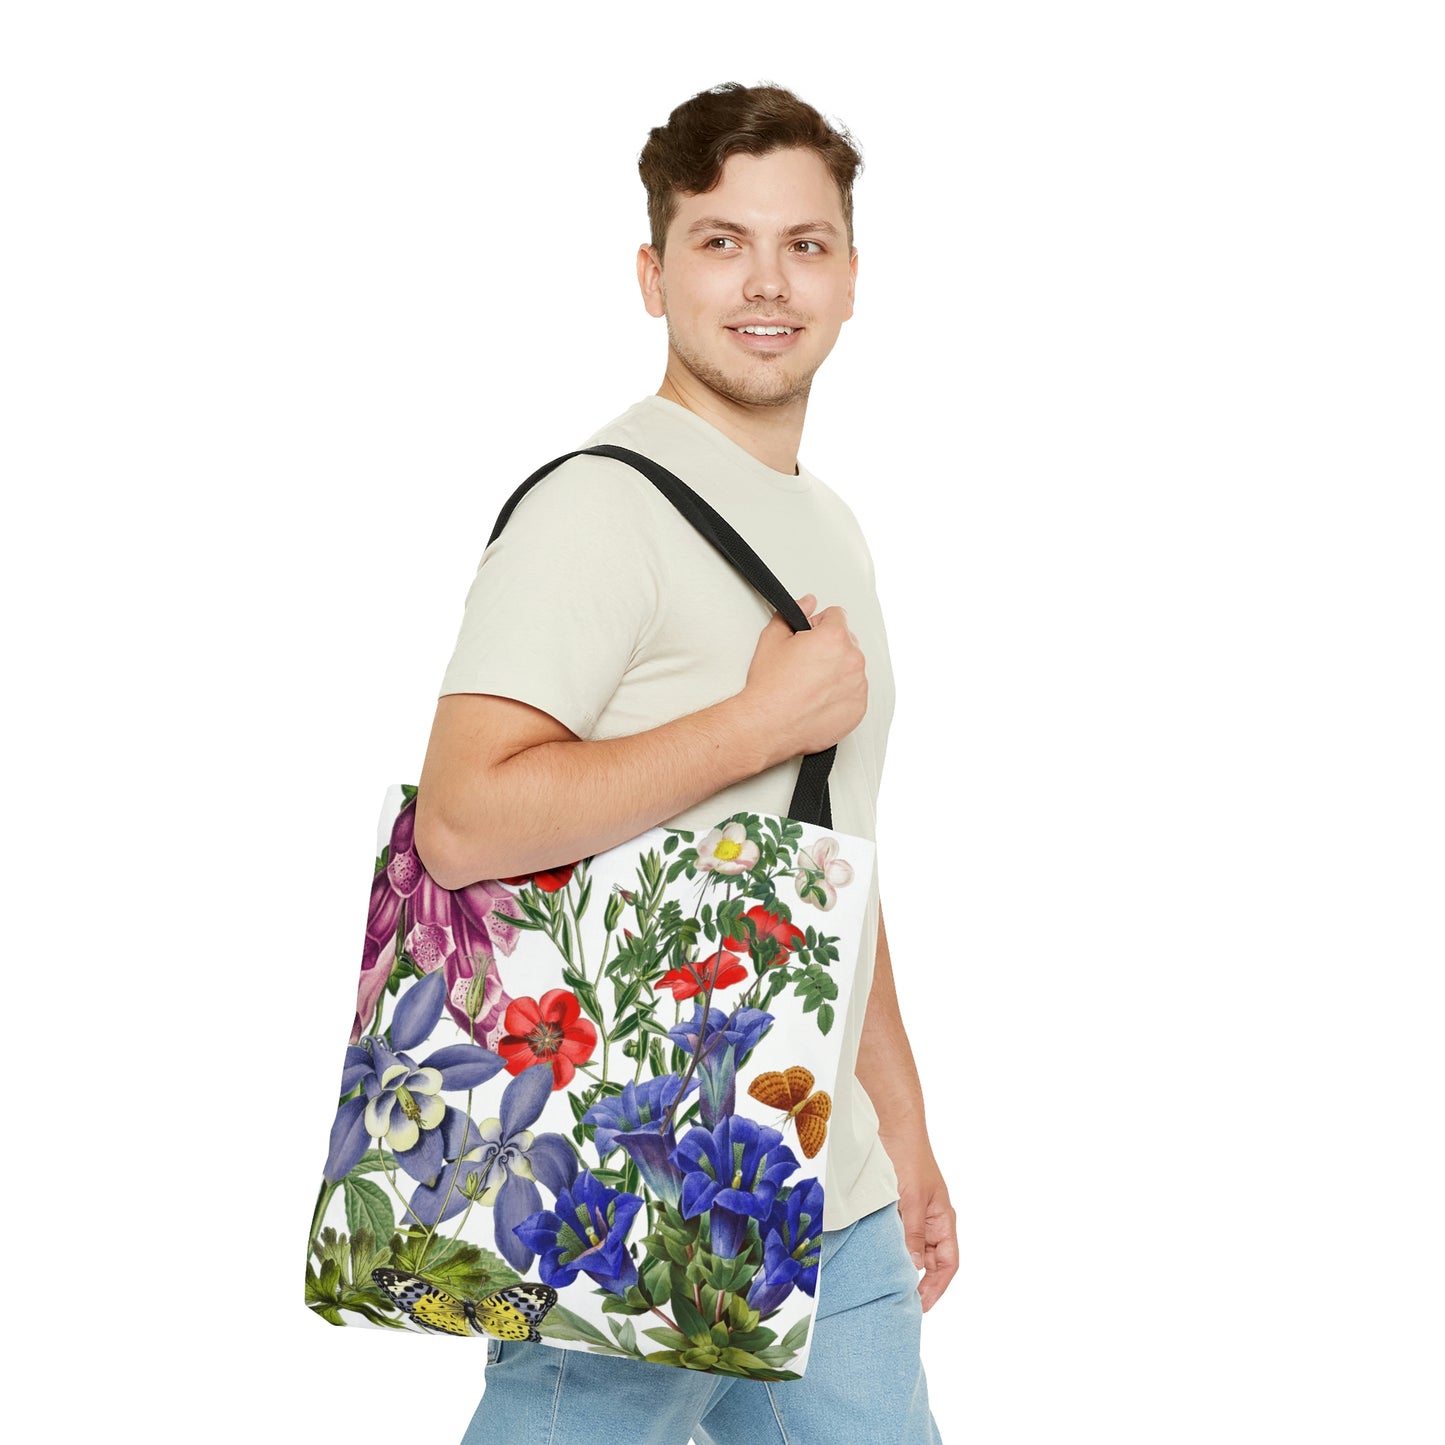 High Quality, All-Over Print Tote Bag, Flowers, Wildflowers, Flowers, Cottagecore, Garden, Foxglove, Wild Rose, Petunias